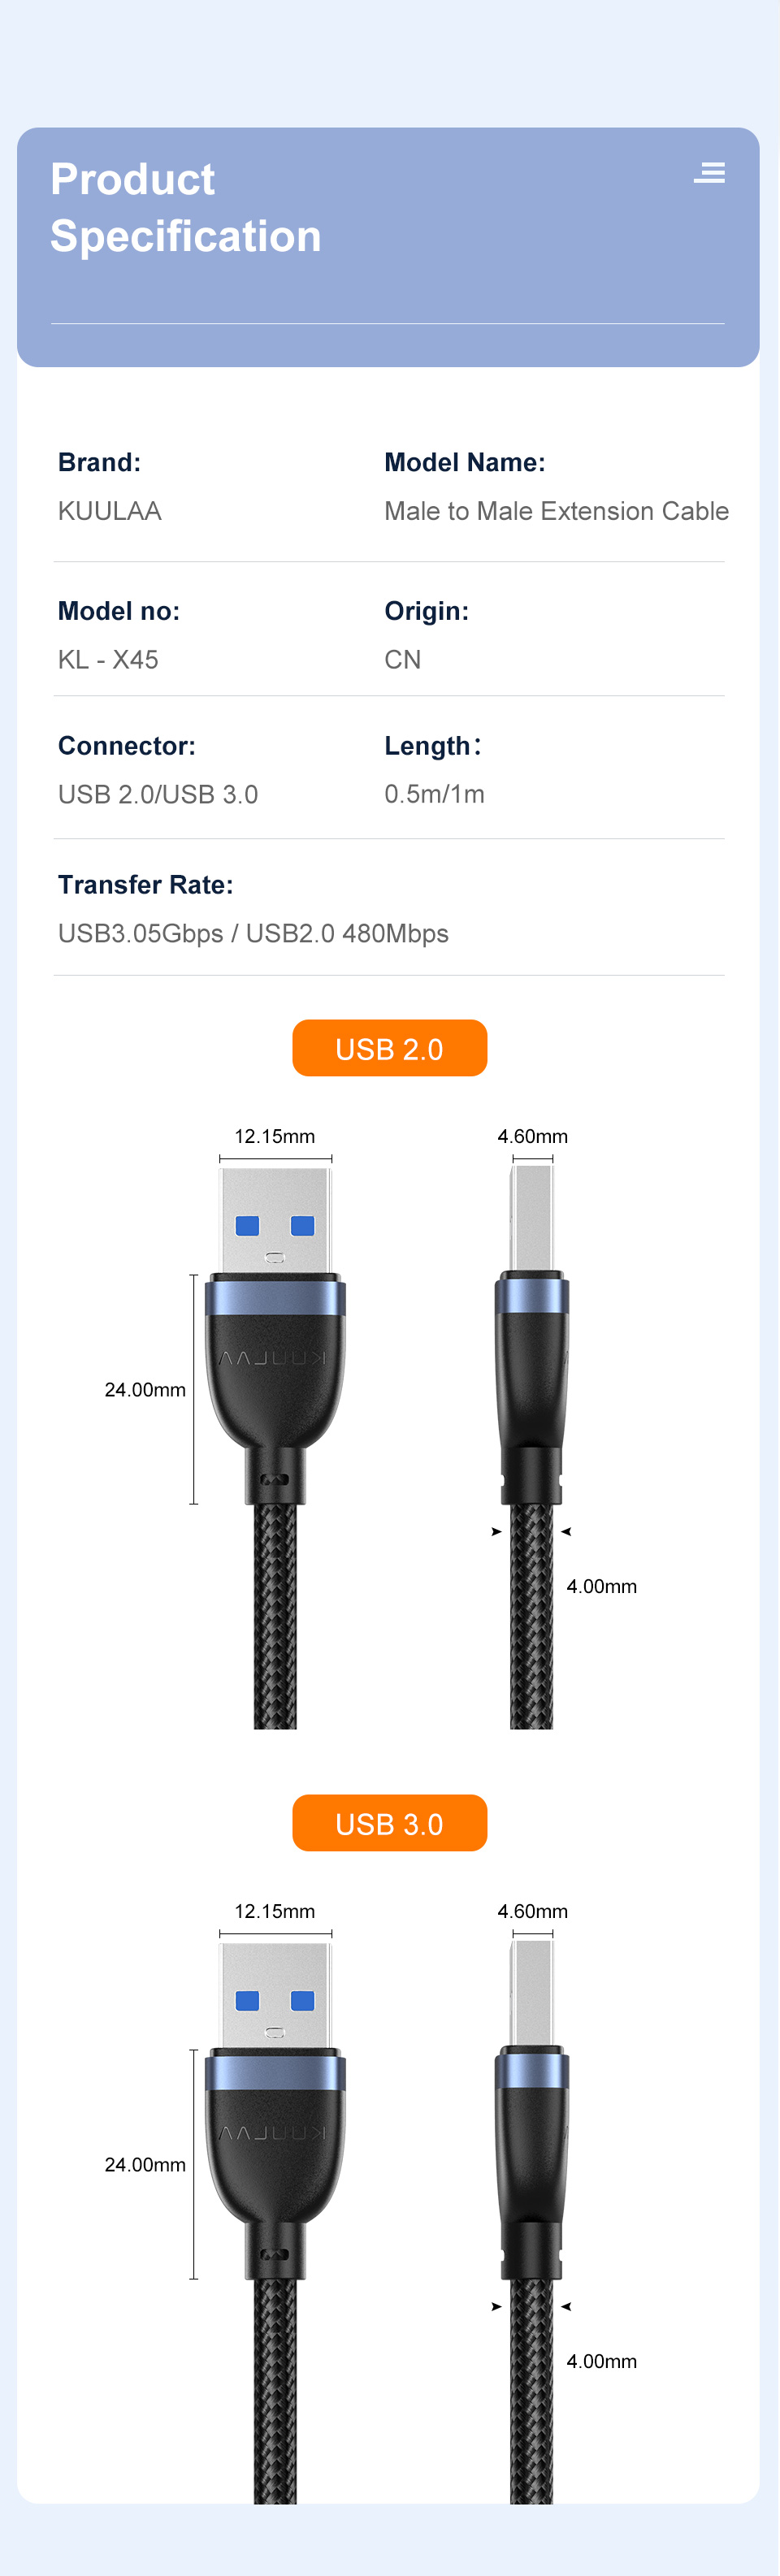 KUULAA-KL-X45-USB-30-To-USB-30-Male-Extension-Cable-Fast-Charging-Data-Transmission-Cord-Line-05m1m--1867162-10